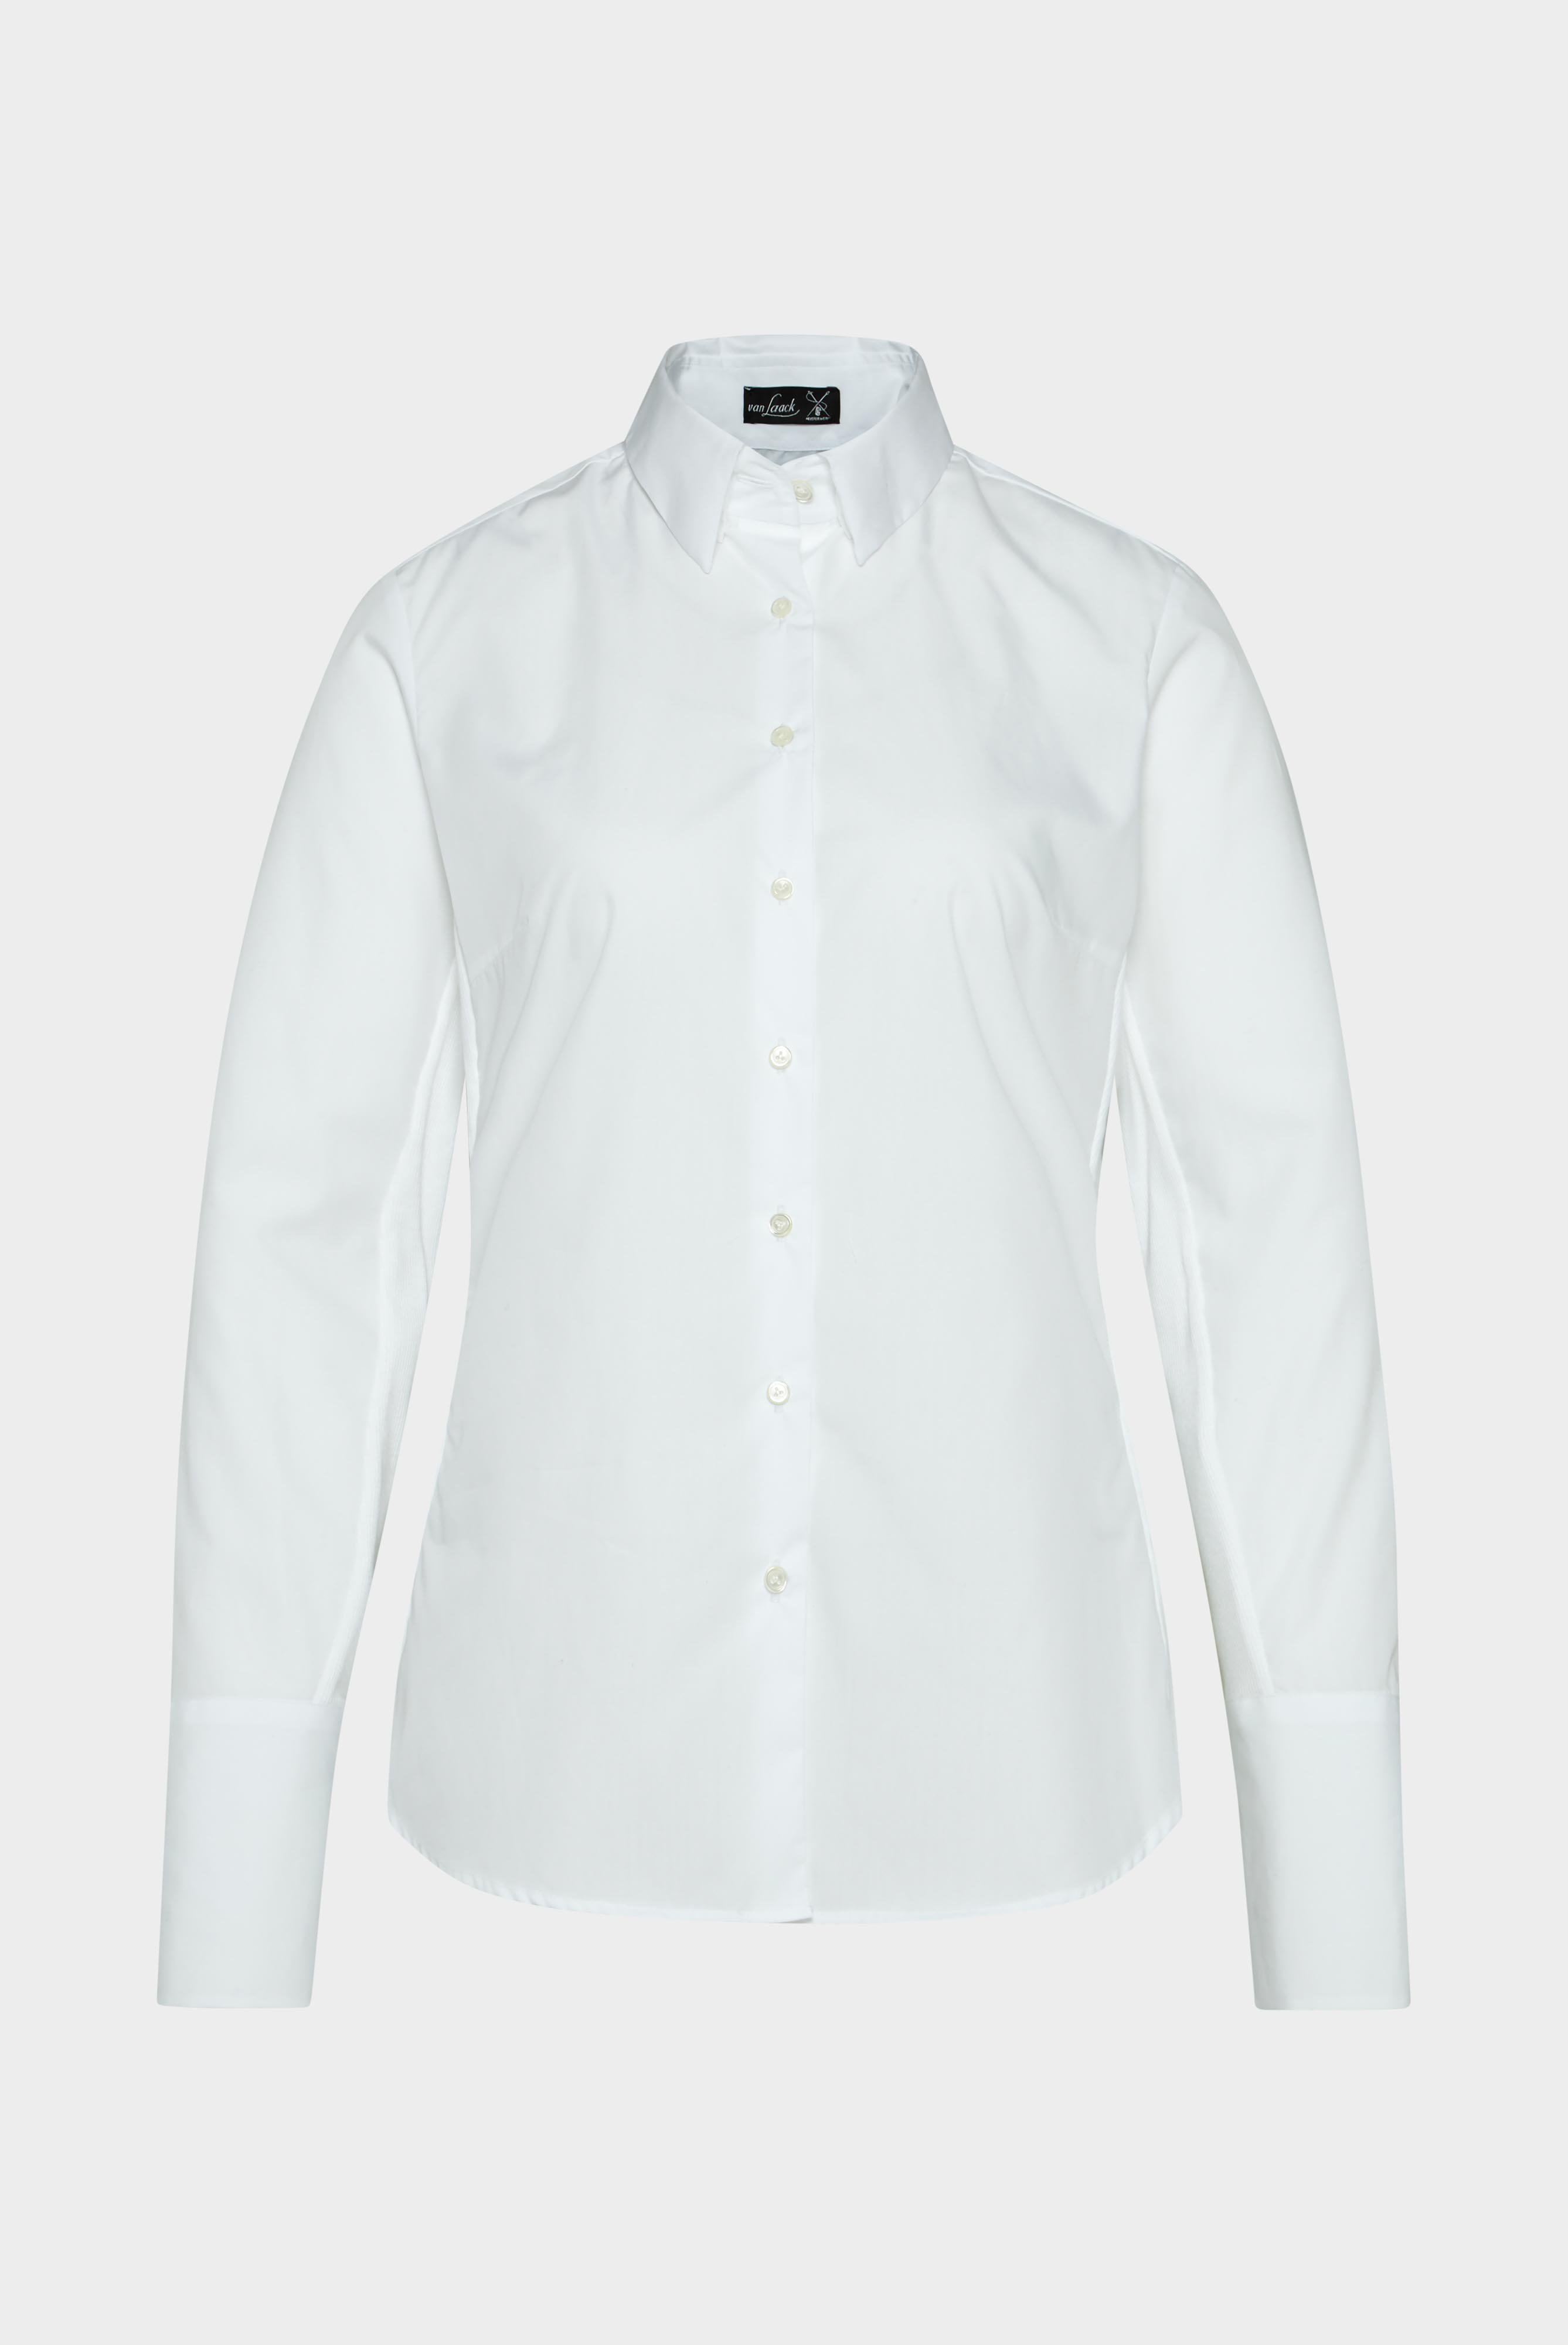 Business Blouses+Hybrid Blouse with Side Jersey Insert Slim Fit+05.515Q.J3.160049.000.42